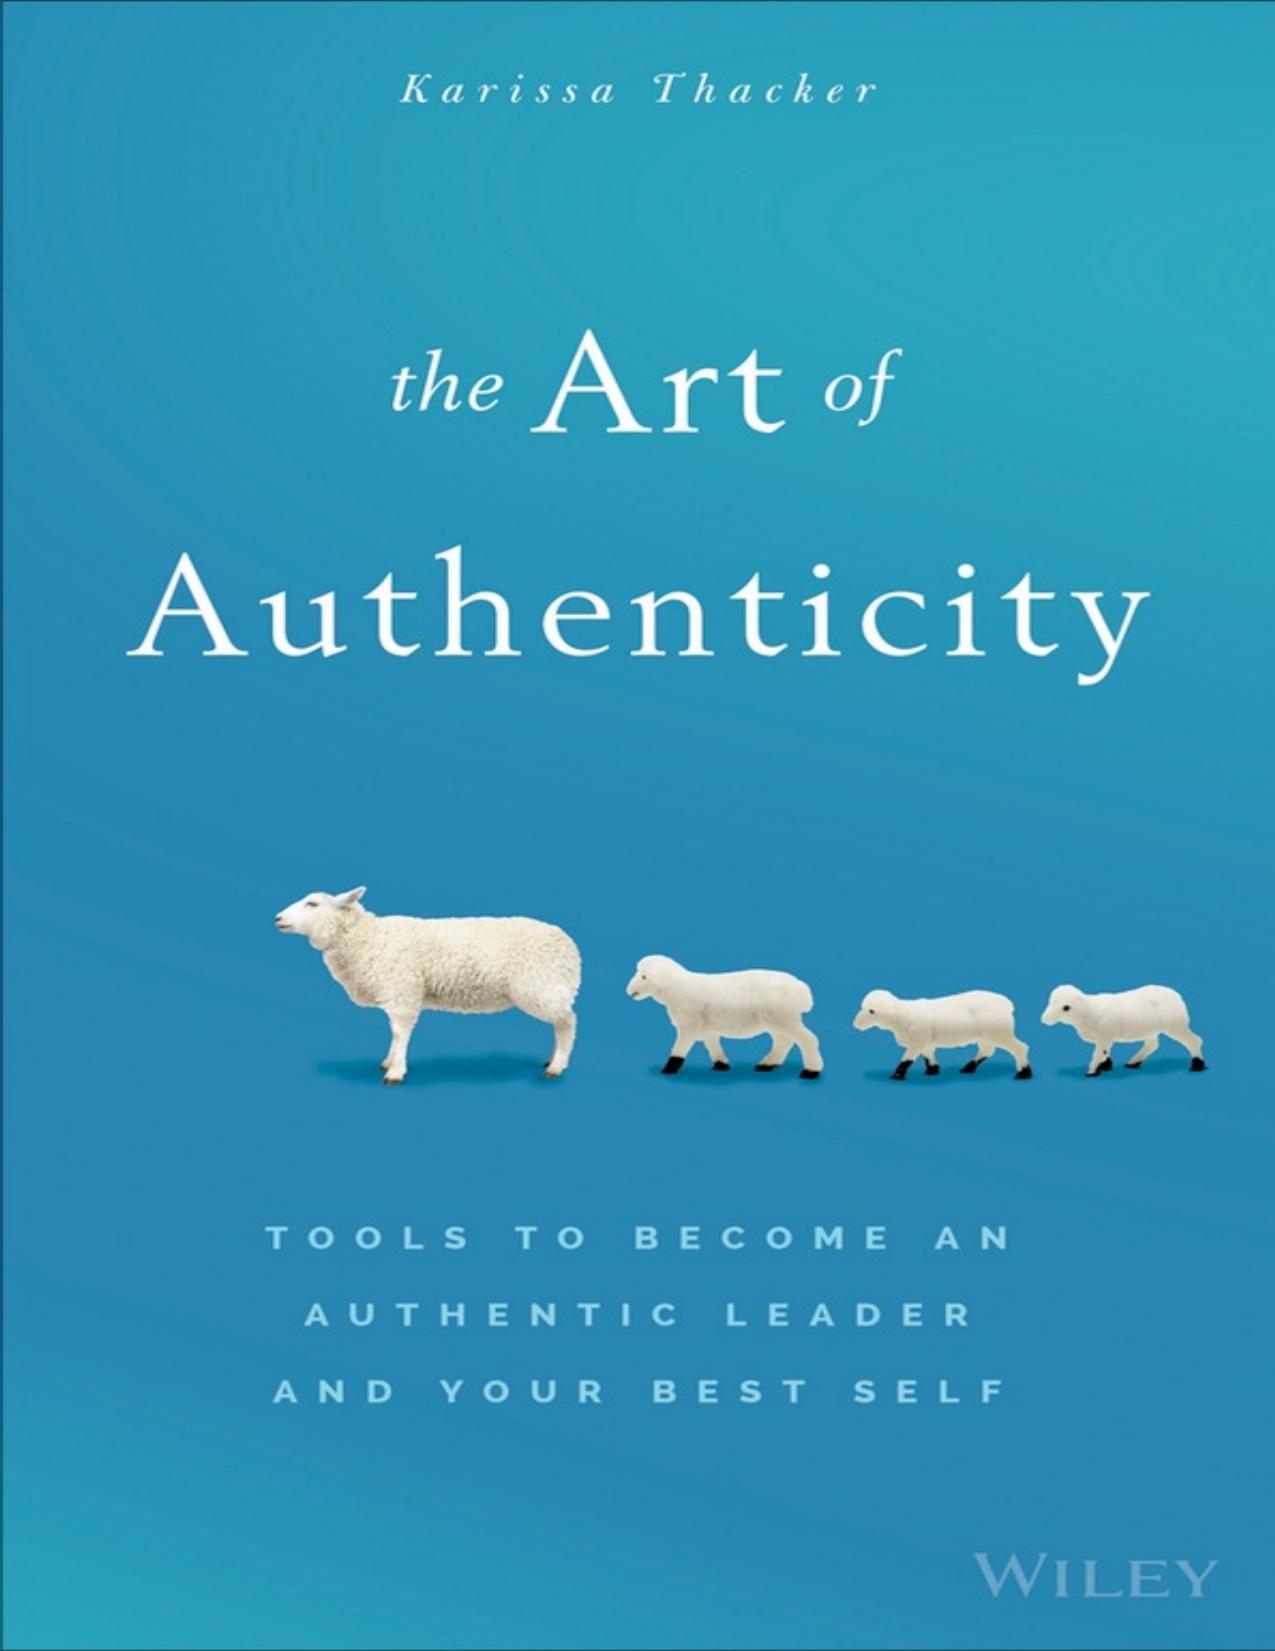 The Art of Authenticity by Karissa Thacker